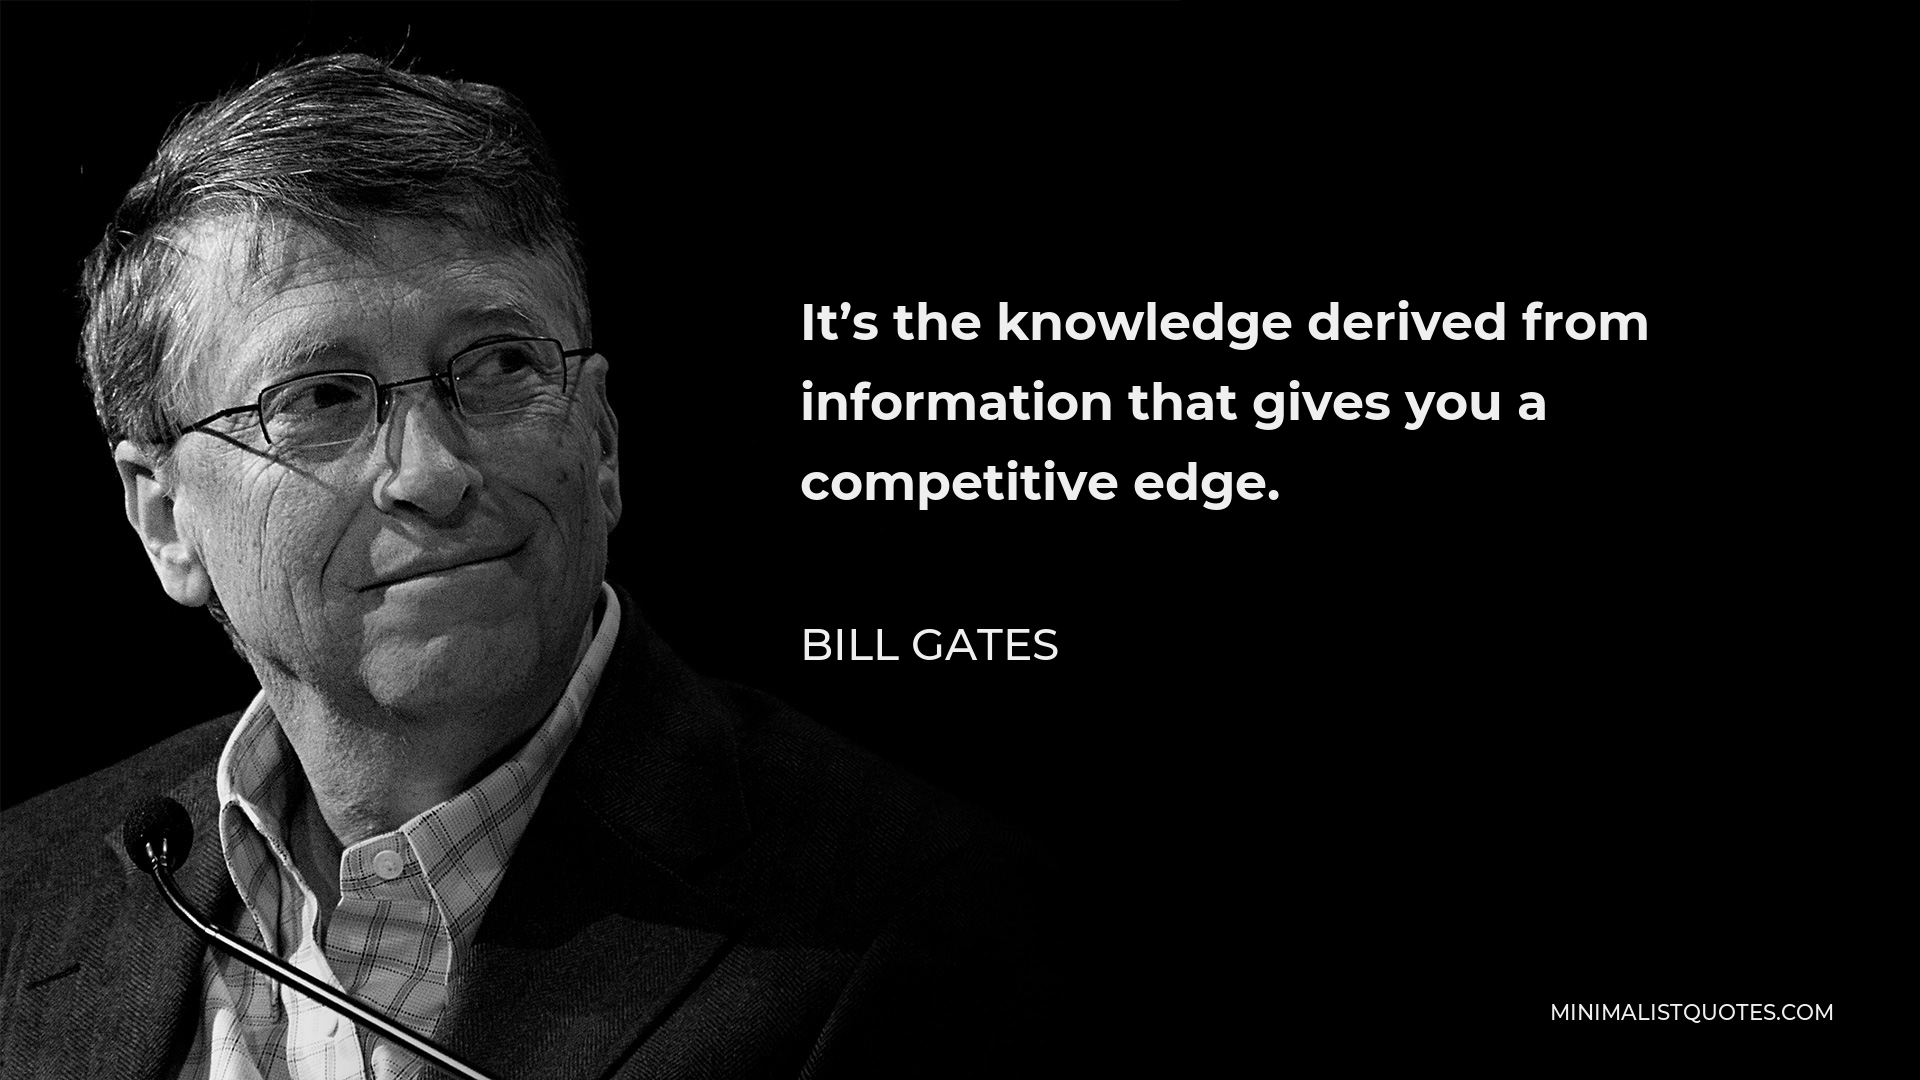 Bill Gates Quote - It’s the knowledge derived from information that gives you a competitive edge.